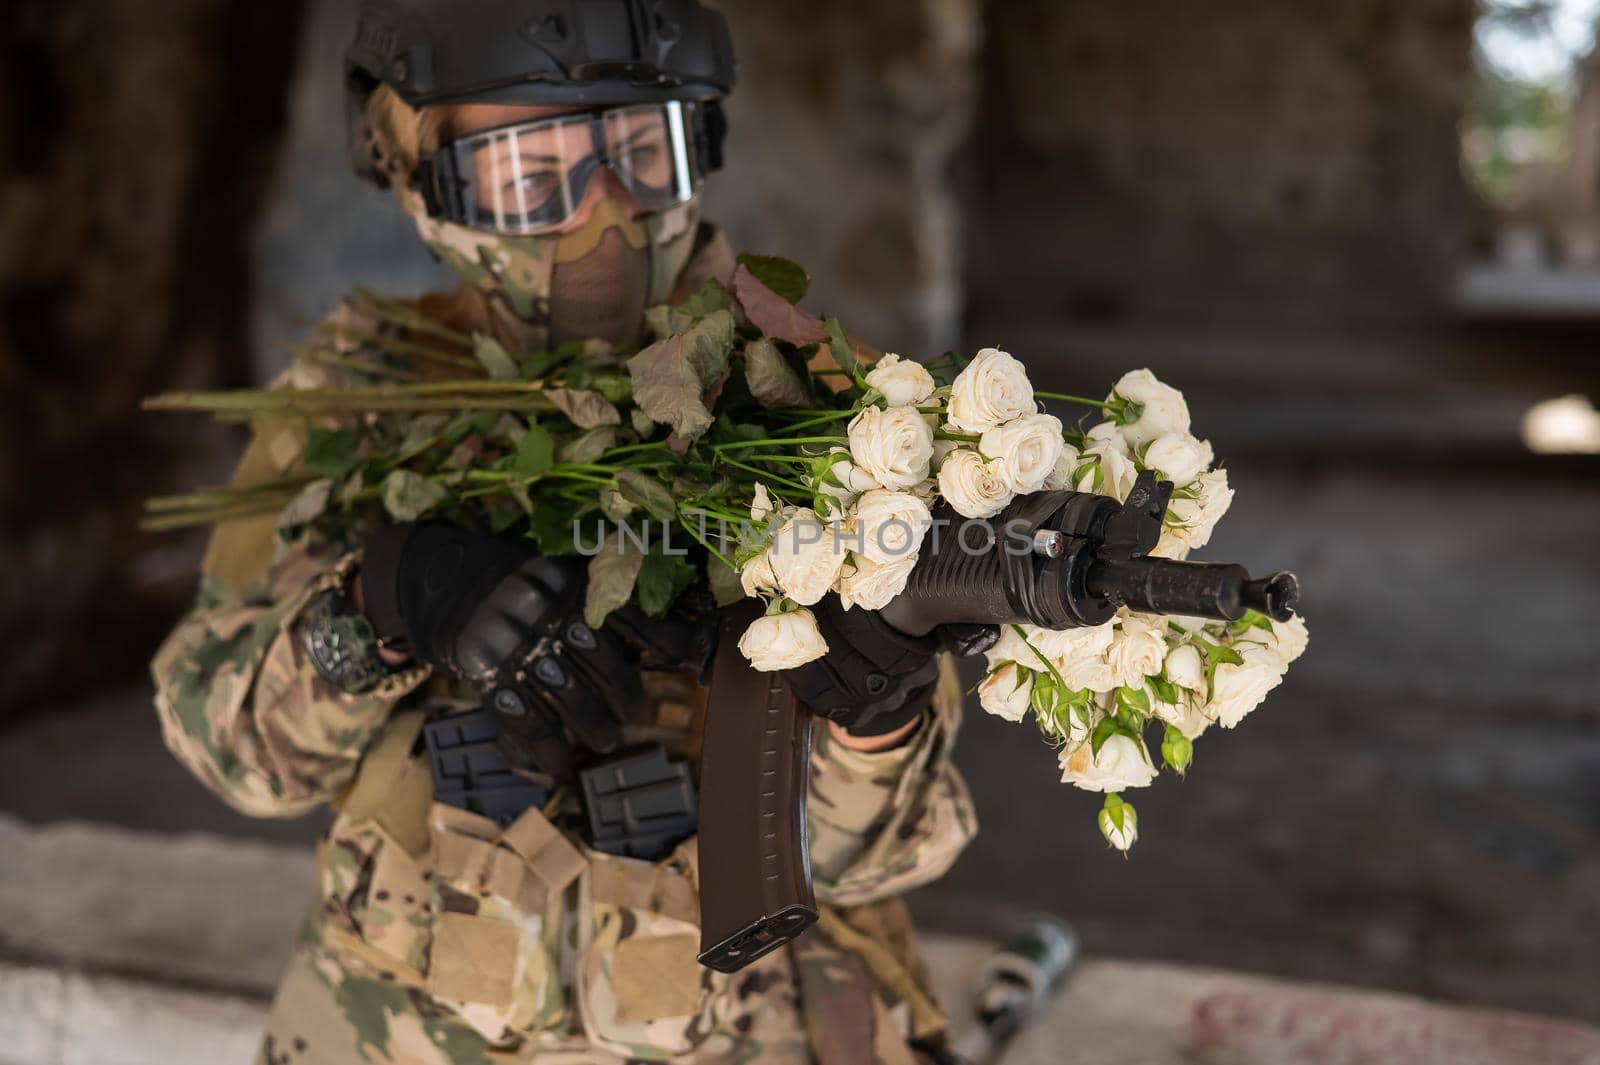 Caucasian woman in military uniform holding a machine gun and a bouquet of white roses. by mrwed54